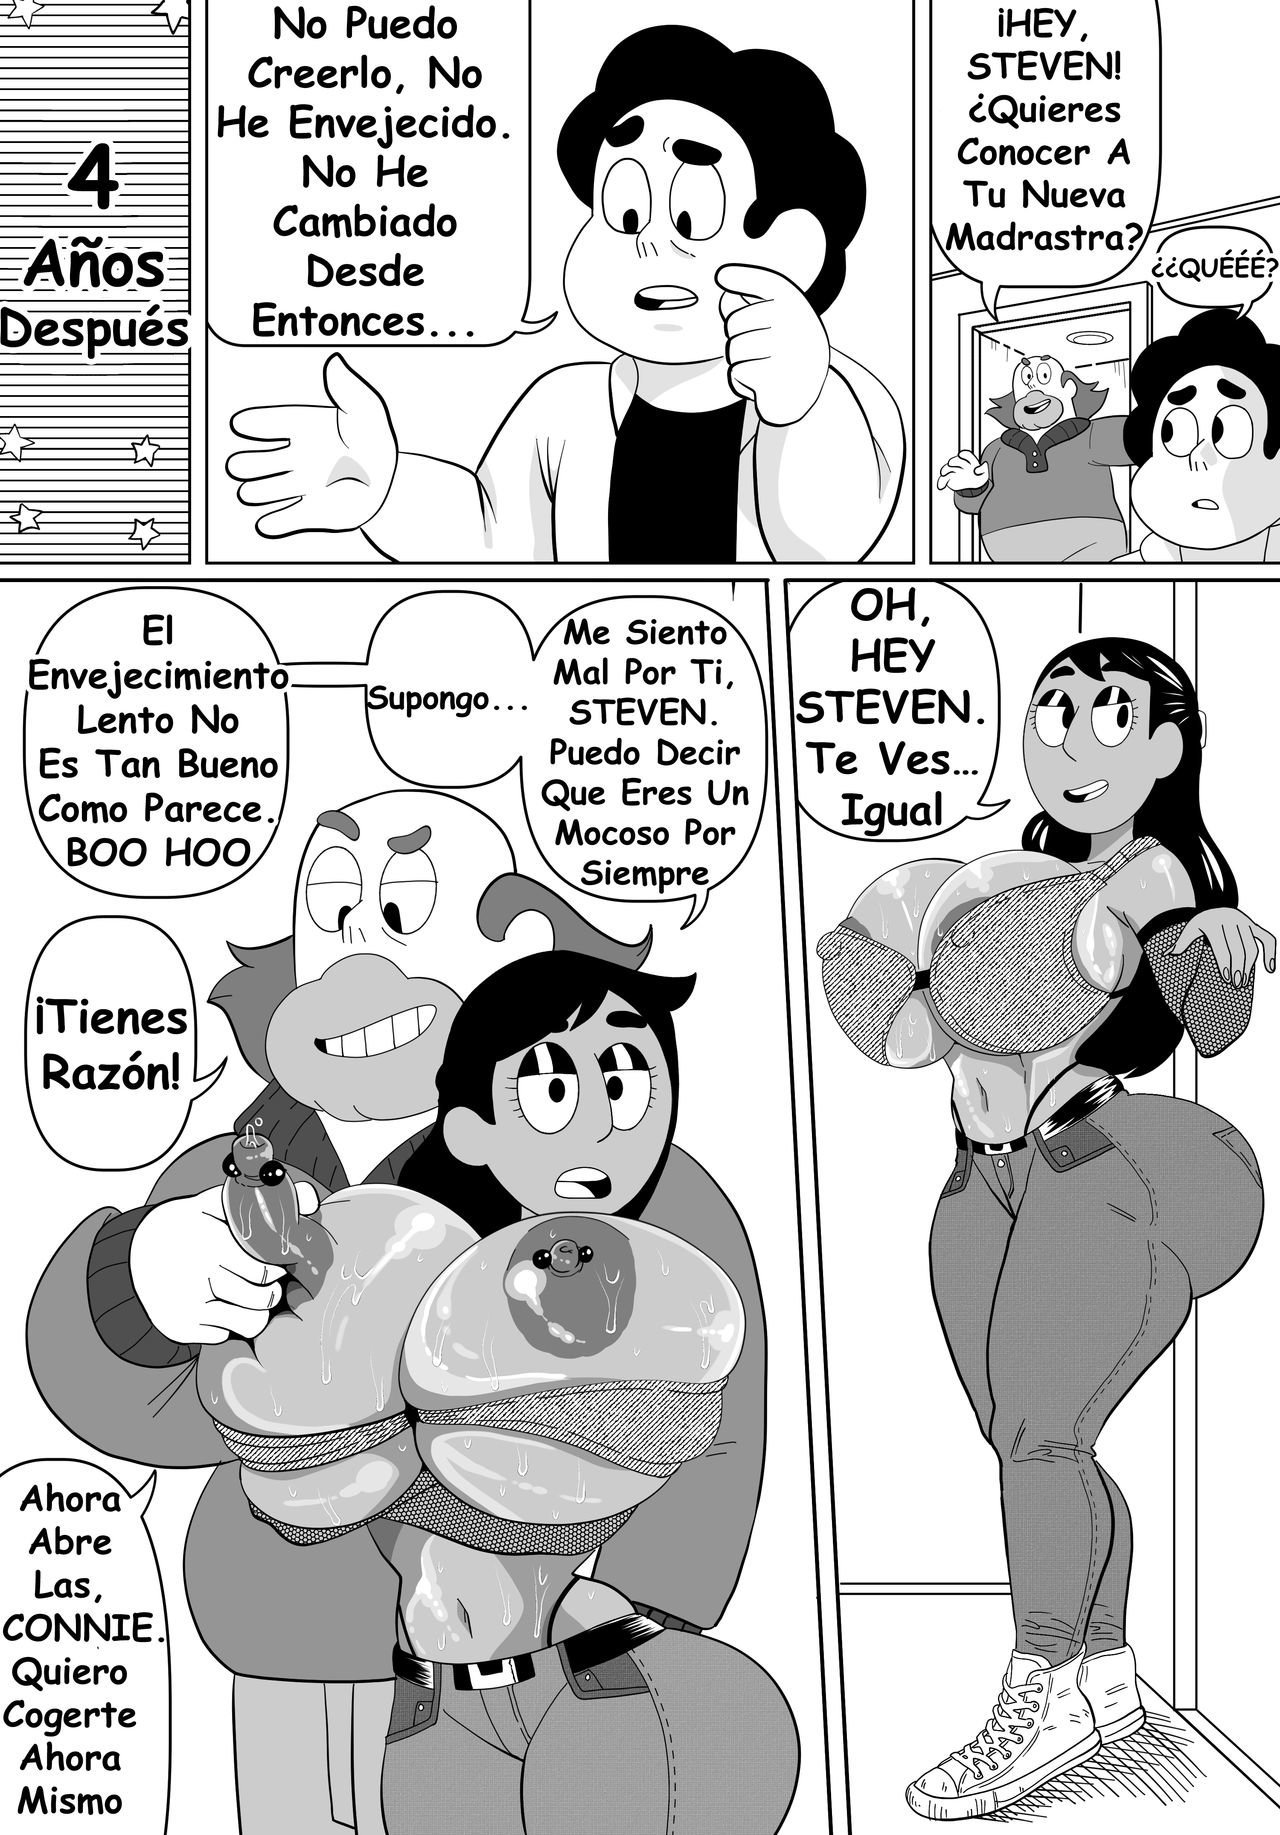 Connie and Greg (and Steven!) - 9